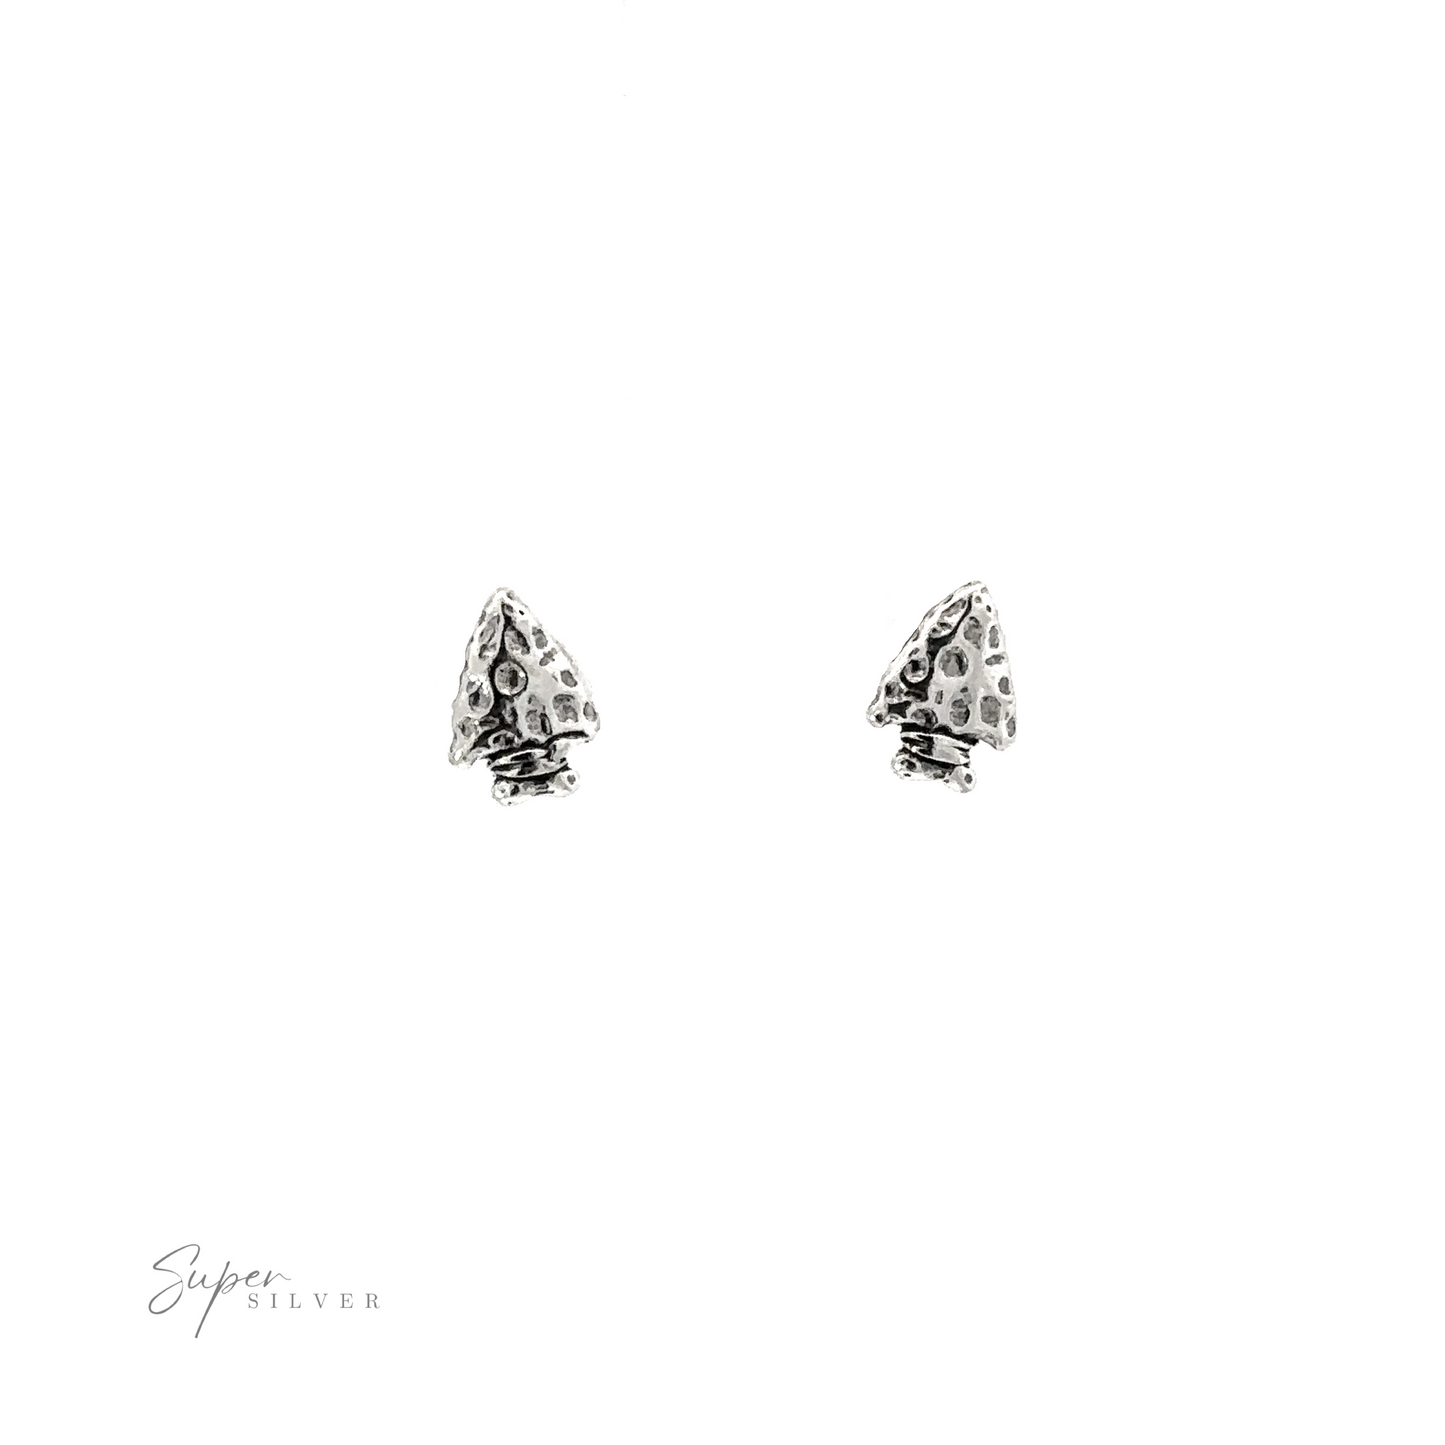 A pair of Arrowhead Studs with a detailed texture on a white background.